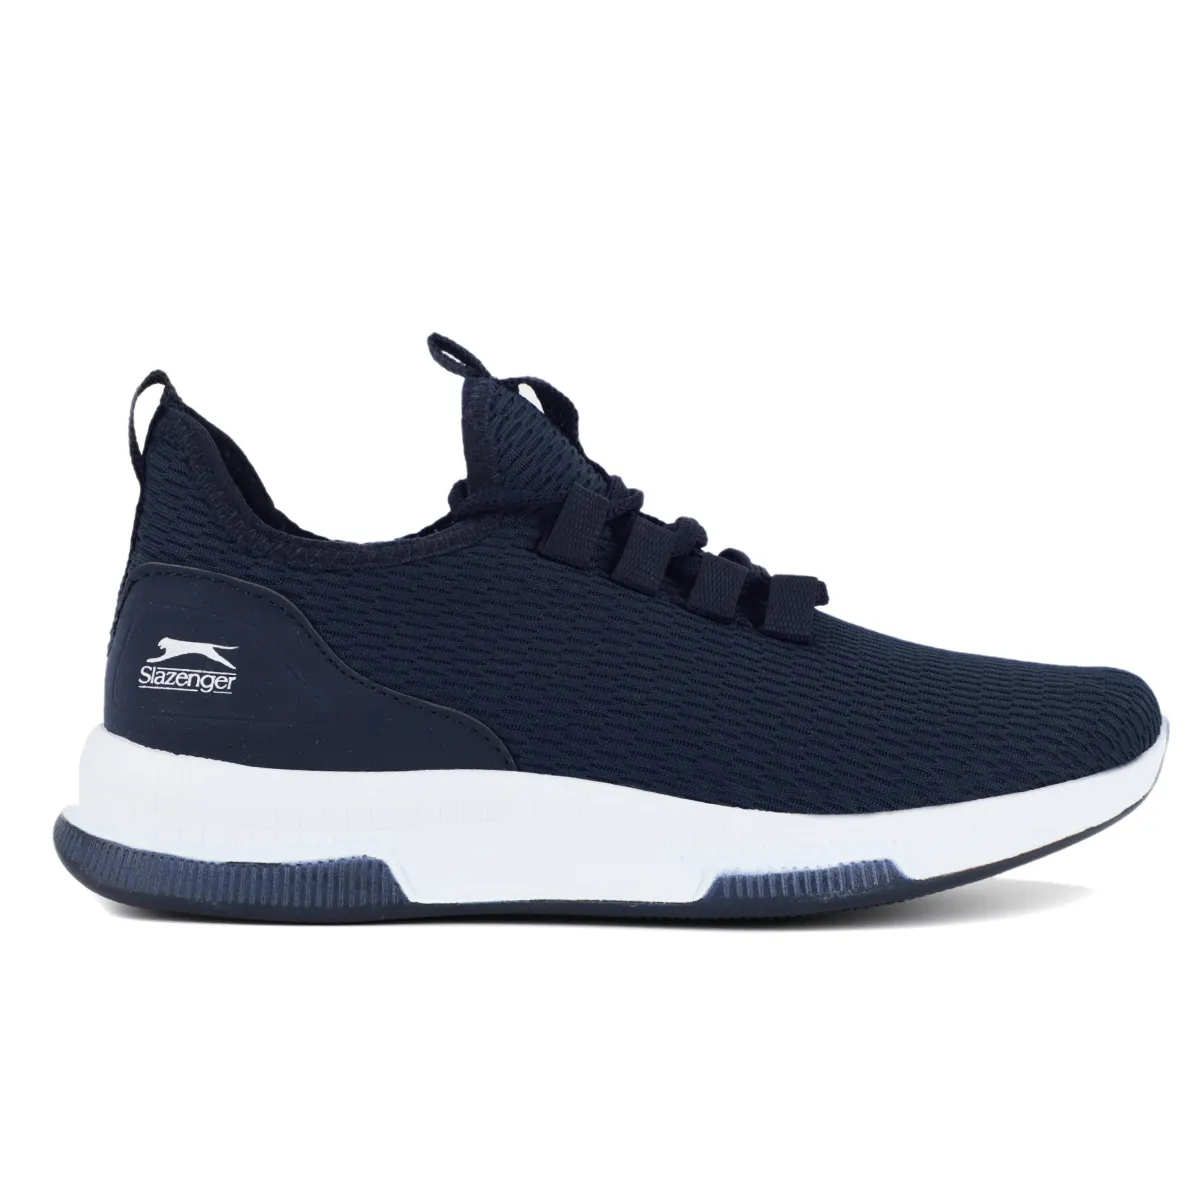 New Sports Shoes Running Navy Blue and White Sneakers Fashion Sports Sneakers Slazenger